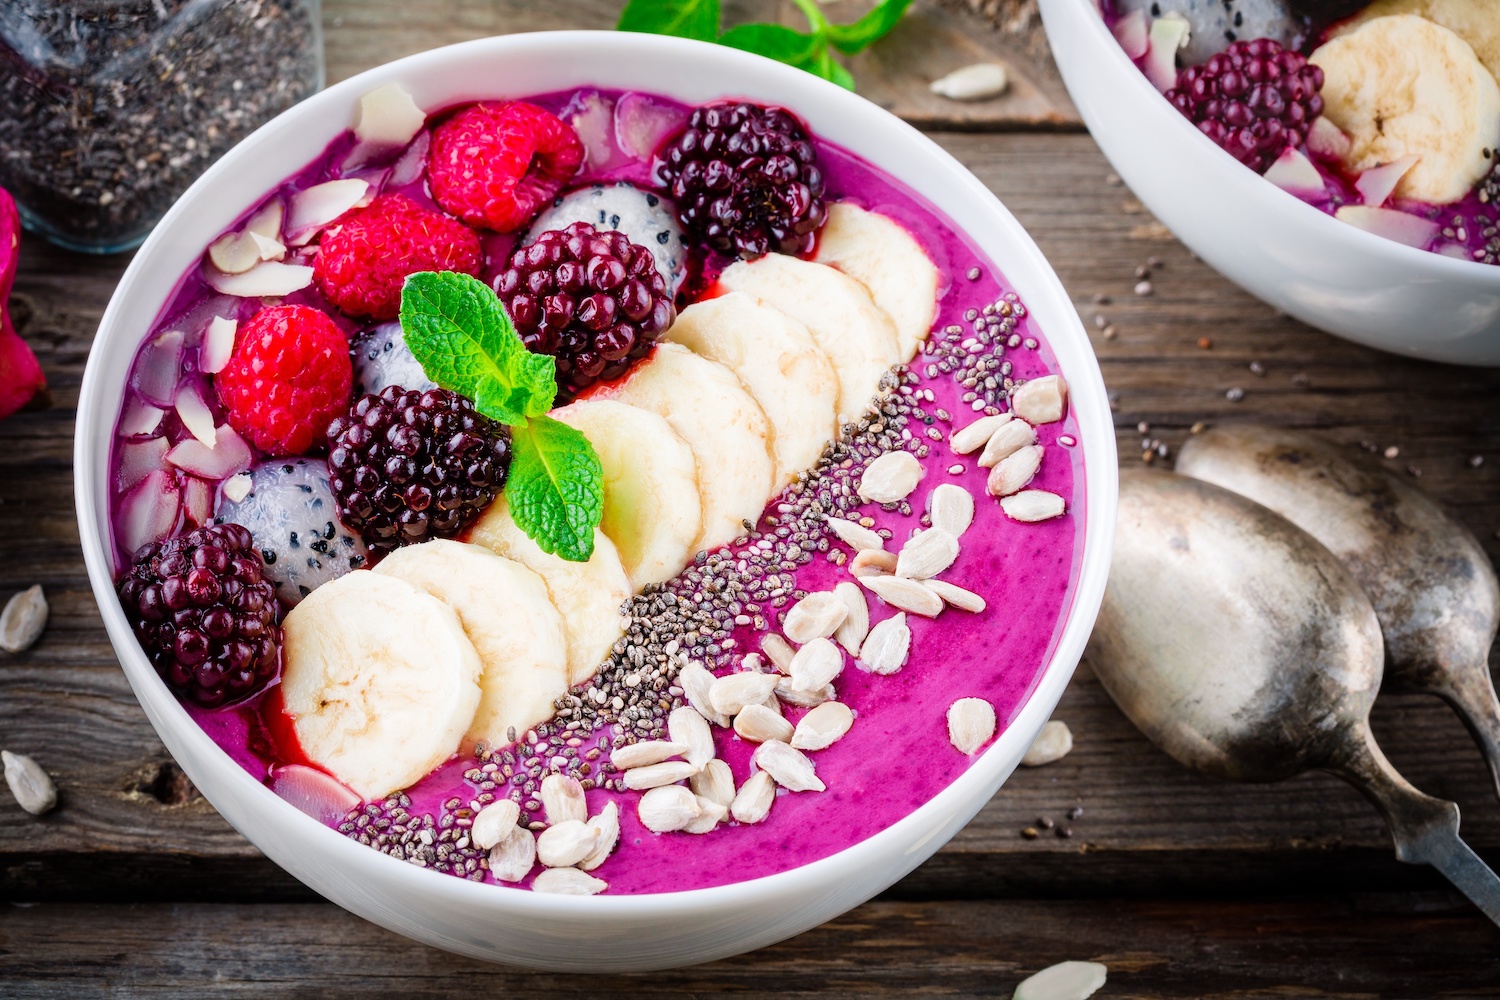 Low Calorie Acai Smoothie Bowls - Lose Weight By Eating